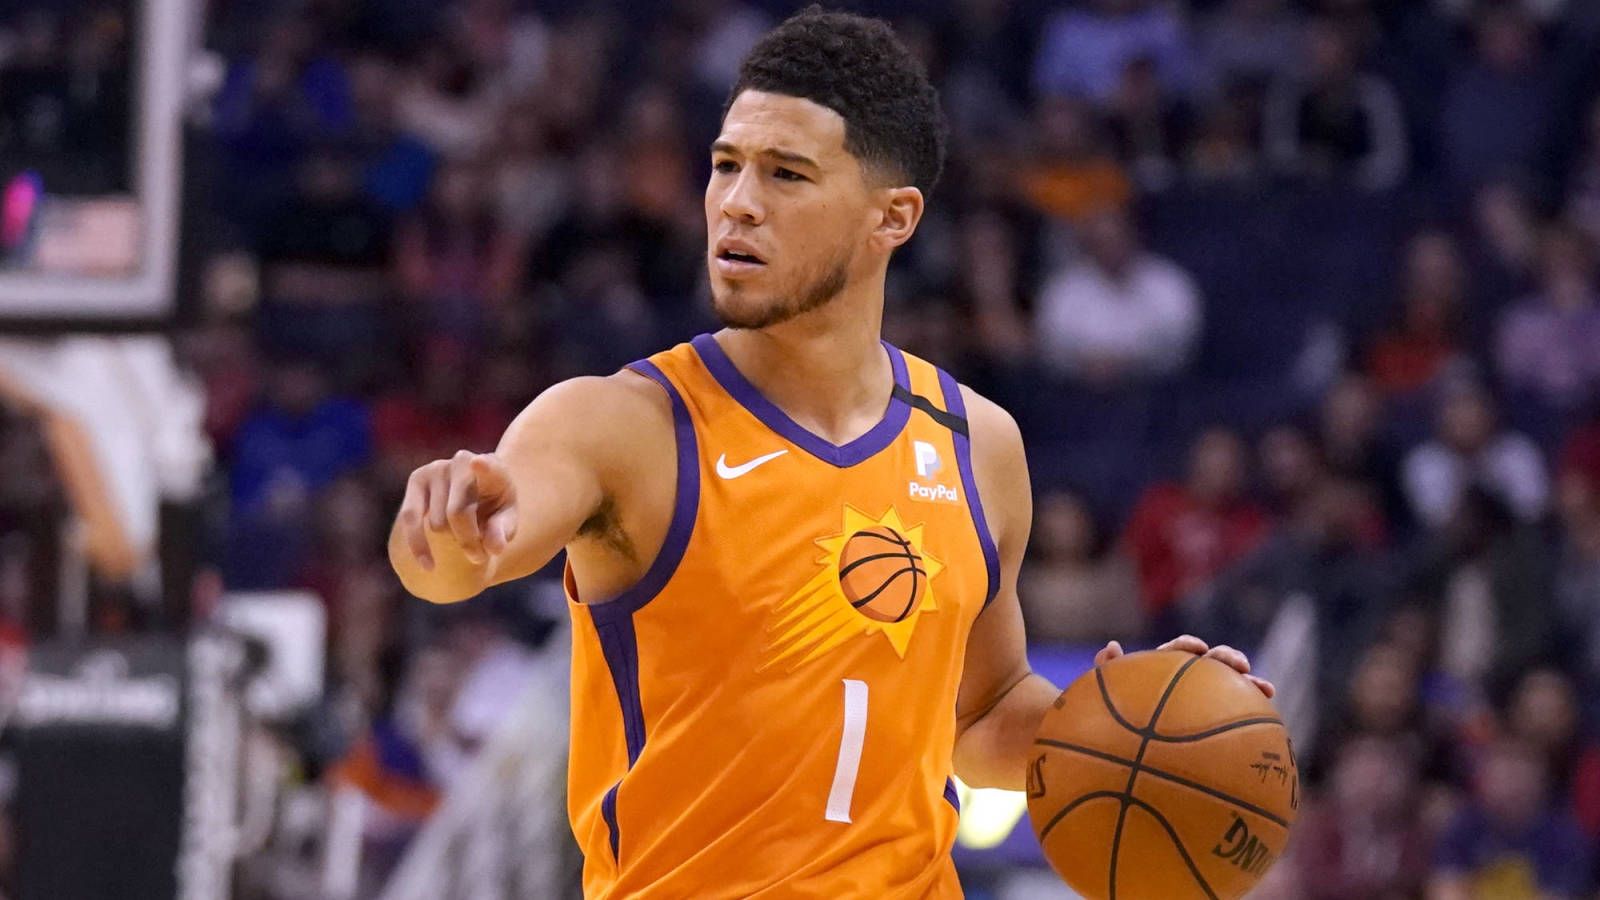 Report: Devin Booker emerging as possible trade target for Knicks